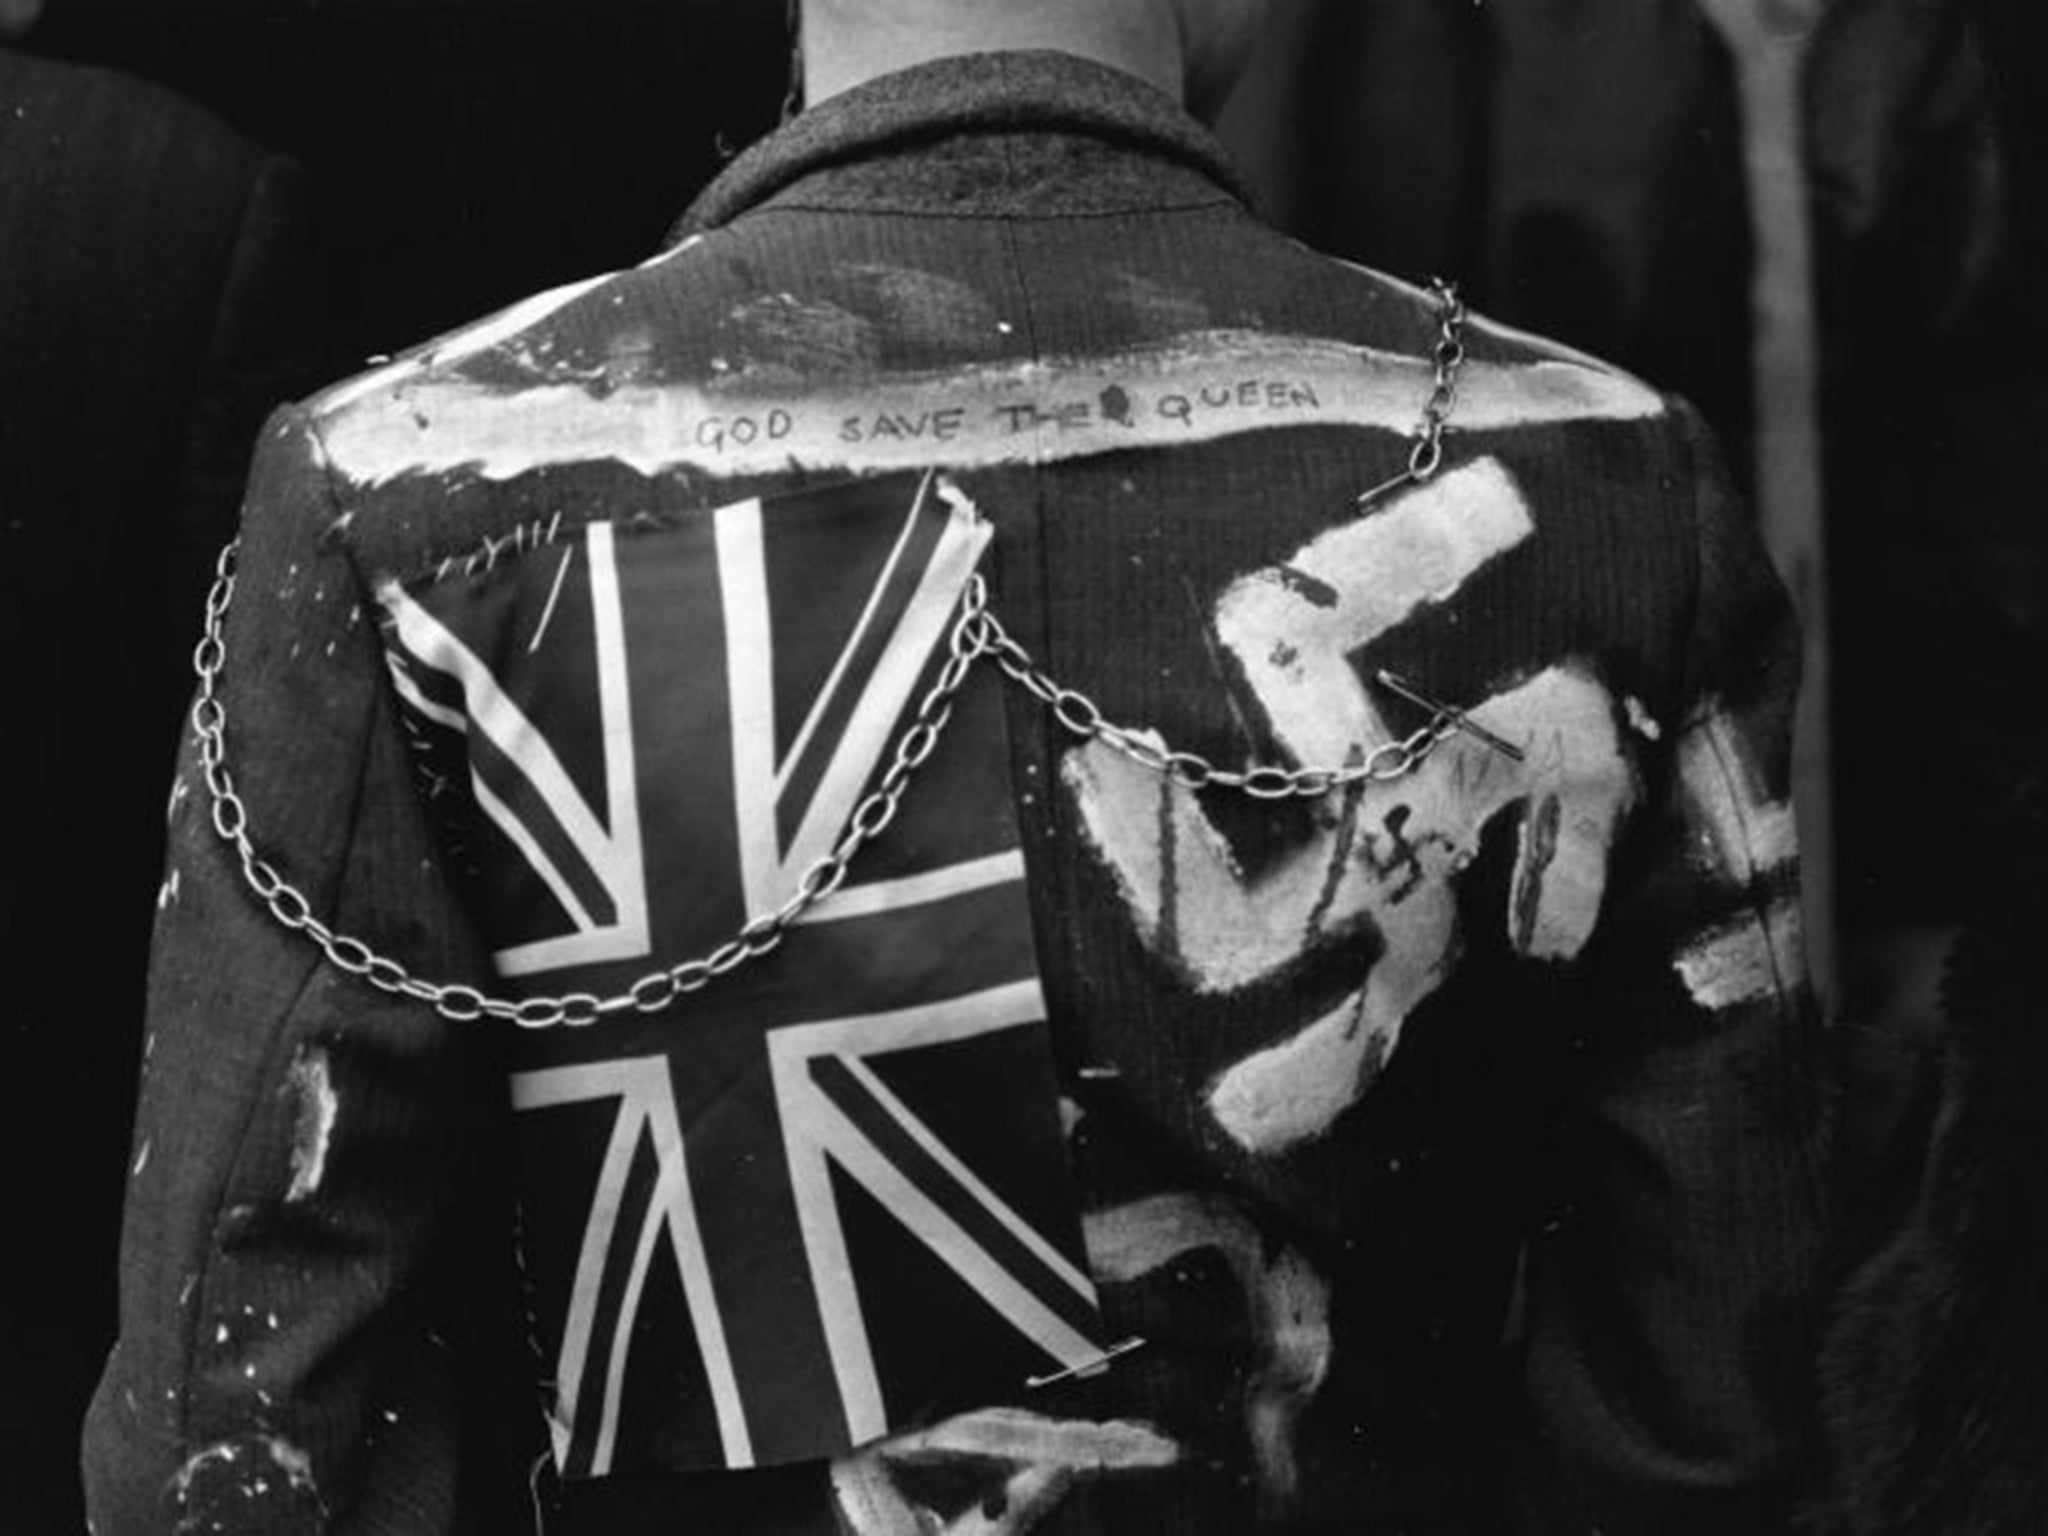 &#13;
The 40th anniversary of punk rock received a £99,000 grant from the Heritage Lottery Fund in 2015 &#13;